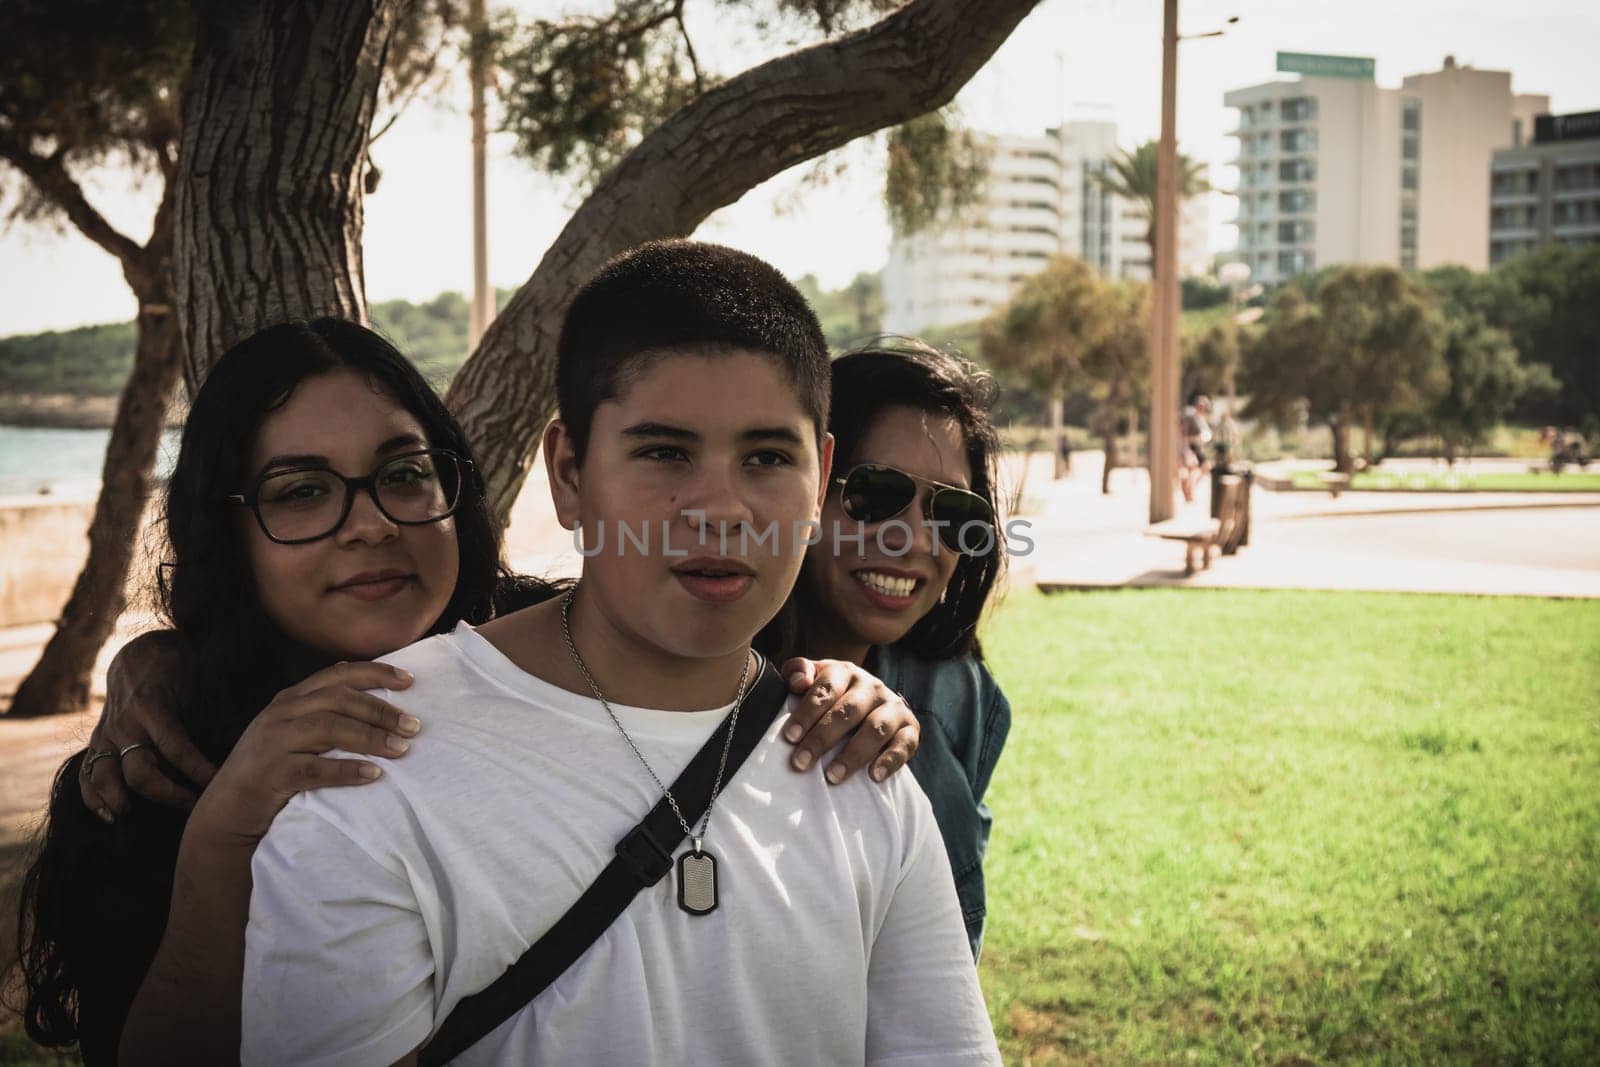 Cheerful group of young Latinos smiling at the camera in the open air, family portrait on a sunny day in the open air park.